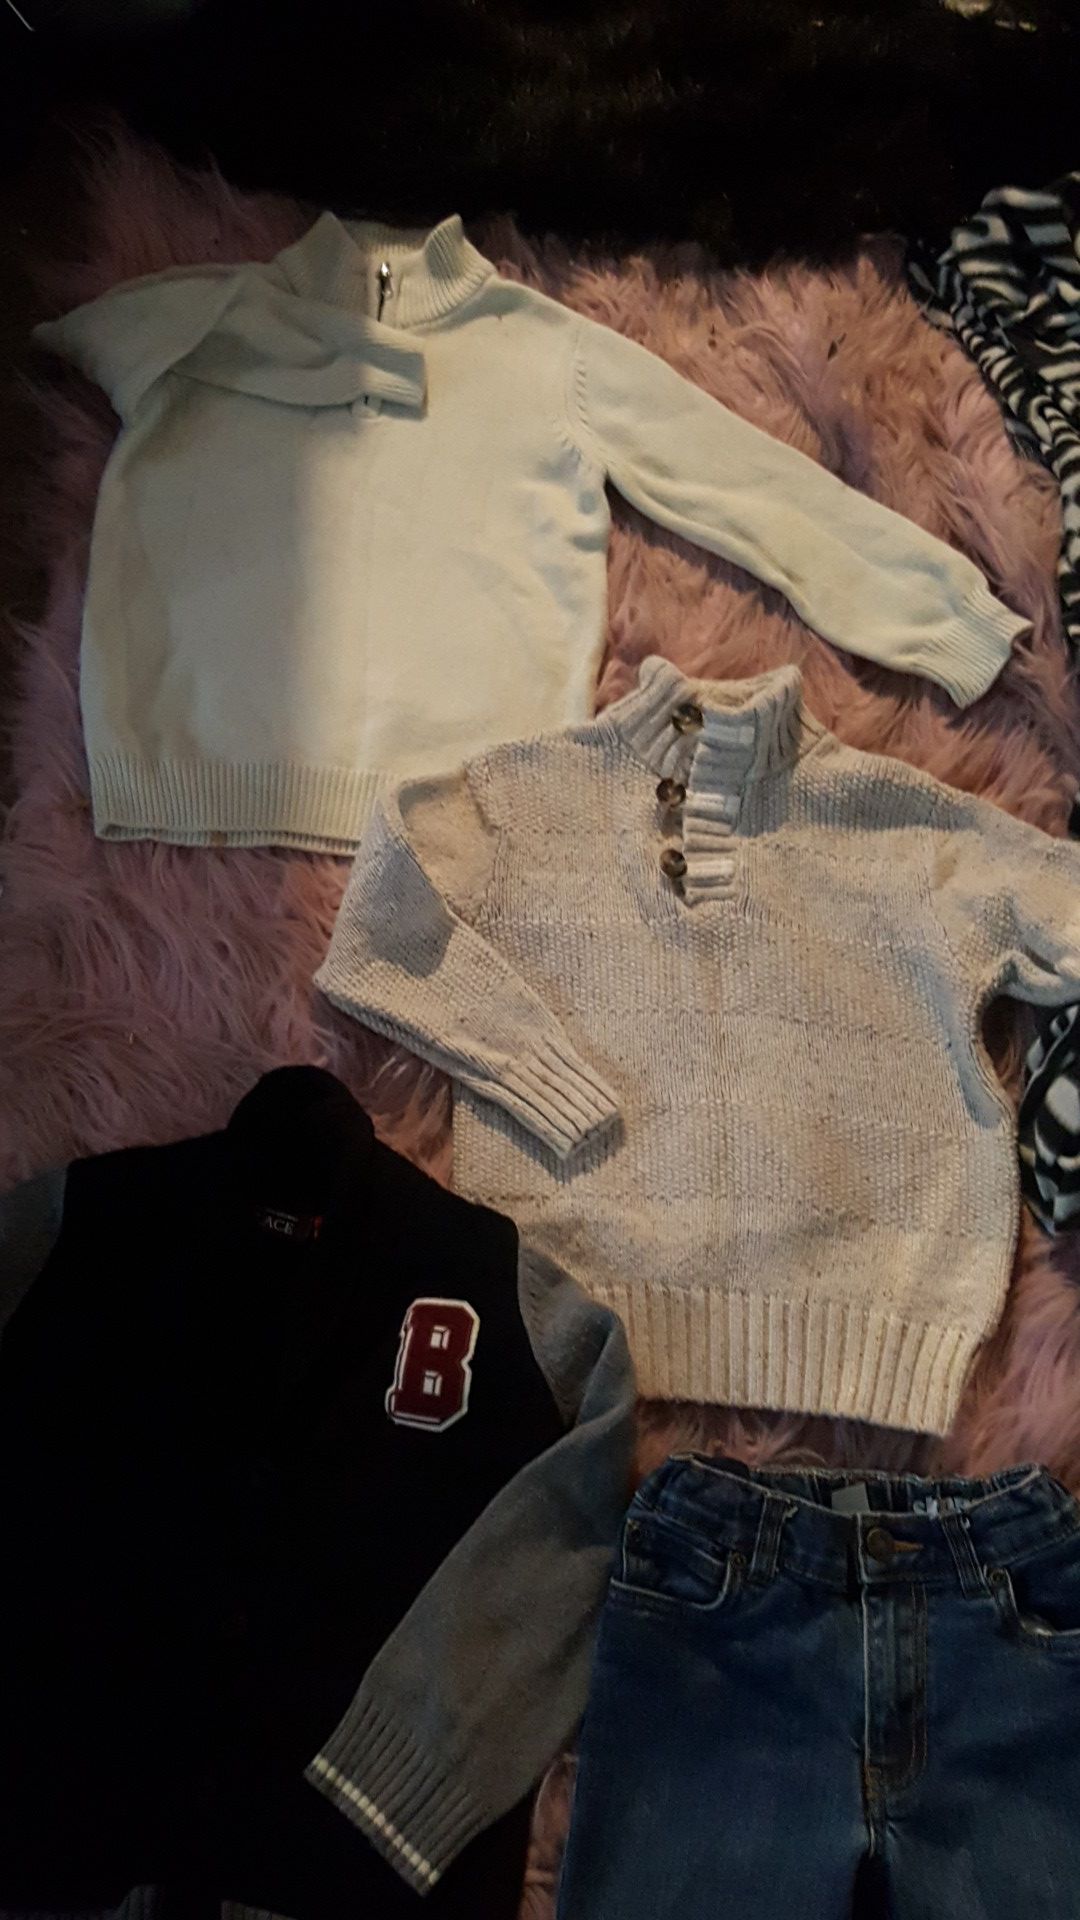 BOYS SIZE 5T 3 DRESS SWEATERS FROM THE CHILDS PLACE AND SIZE 5 JEANS FROM CARTERS